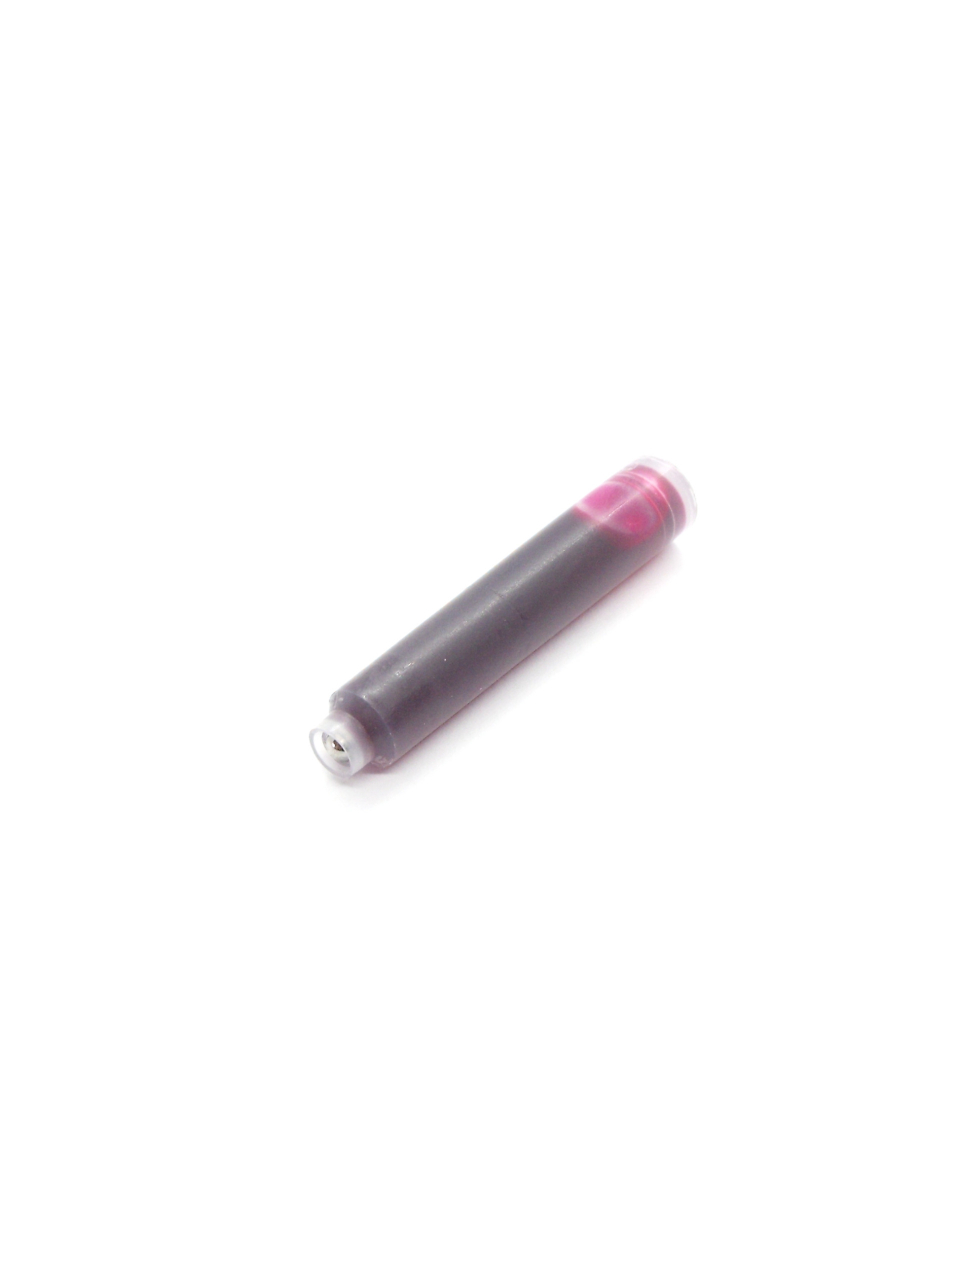 Cartridges For Waterford Fountain Pens (Pink)